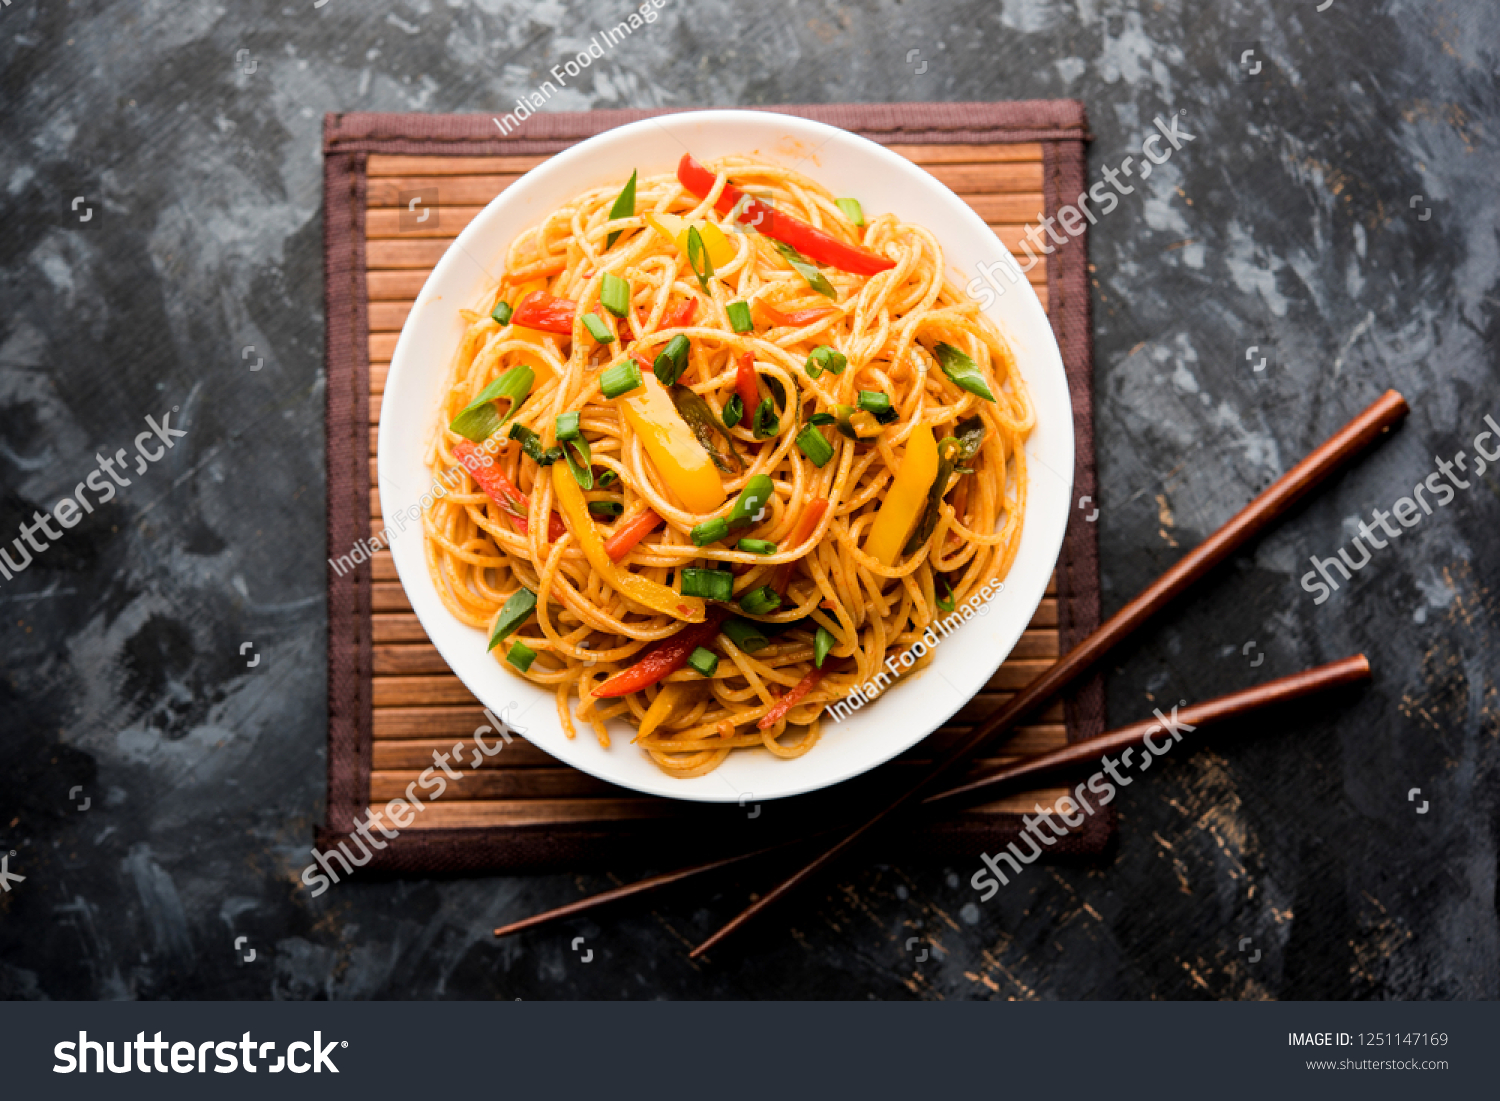 Schezwan Noodles or vegetable Hakka Noodles or chow mein is a popular Indo-Chinese recipes, served in a bowl or plate with wooden chopsticks. selective focus #1251147169